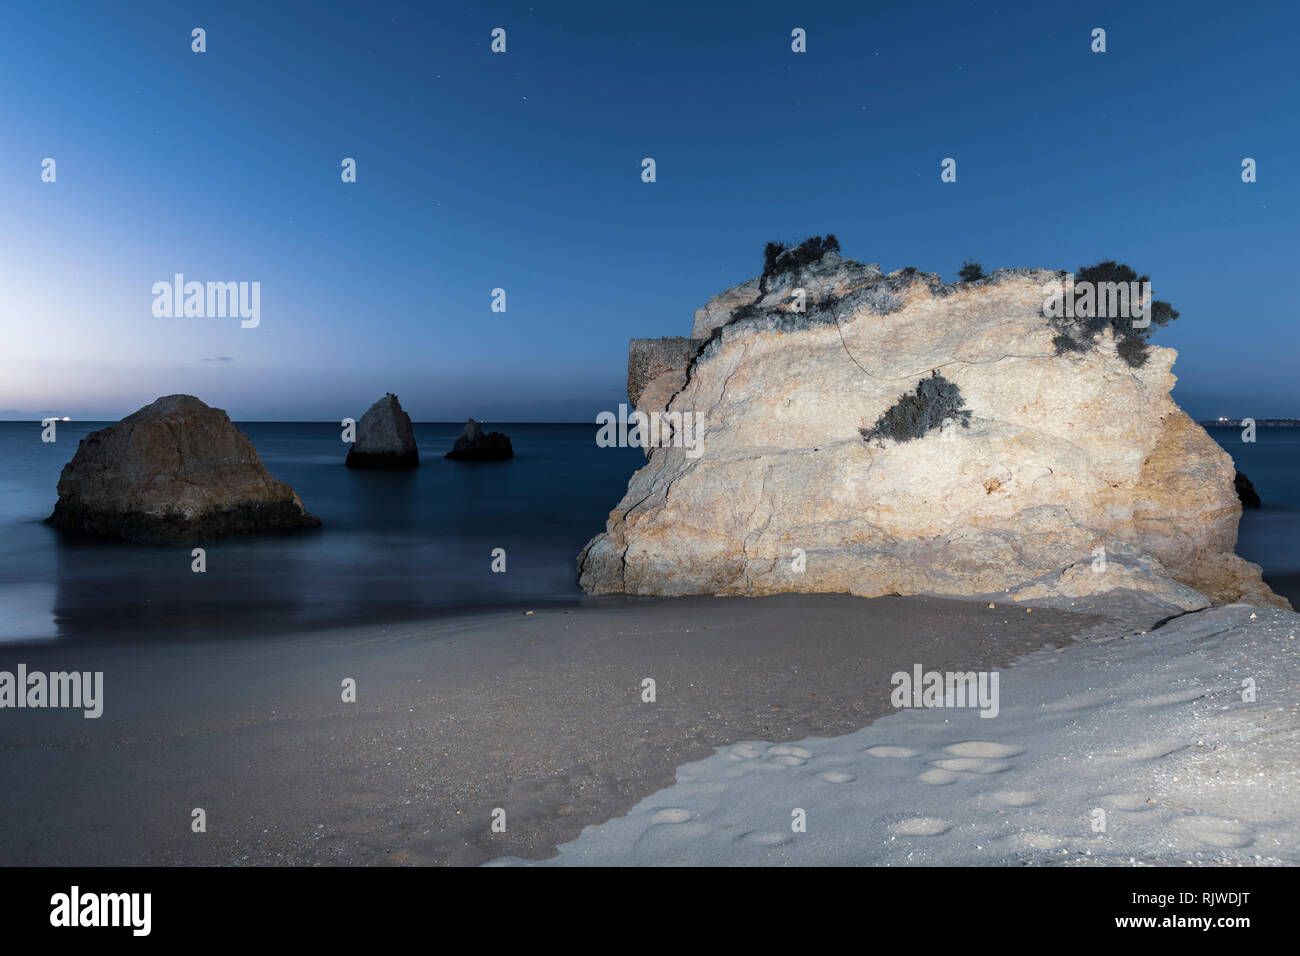 View of sea stacks and rock formations at sunset, Alvor, Algarve, Portugal, Europe Stock Photo